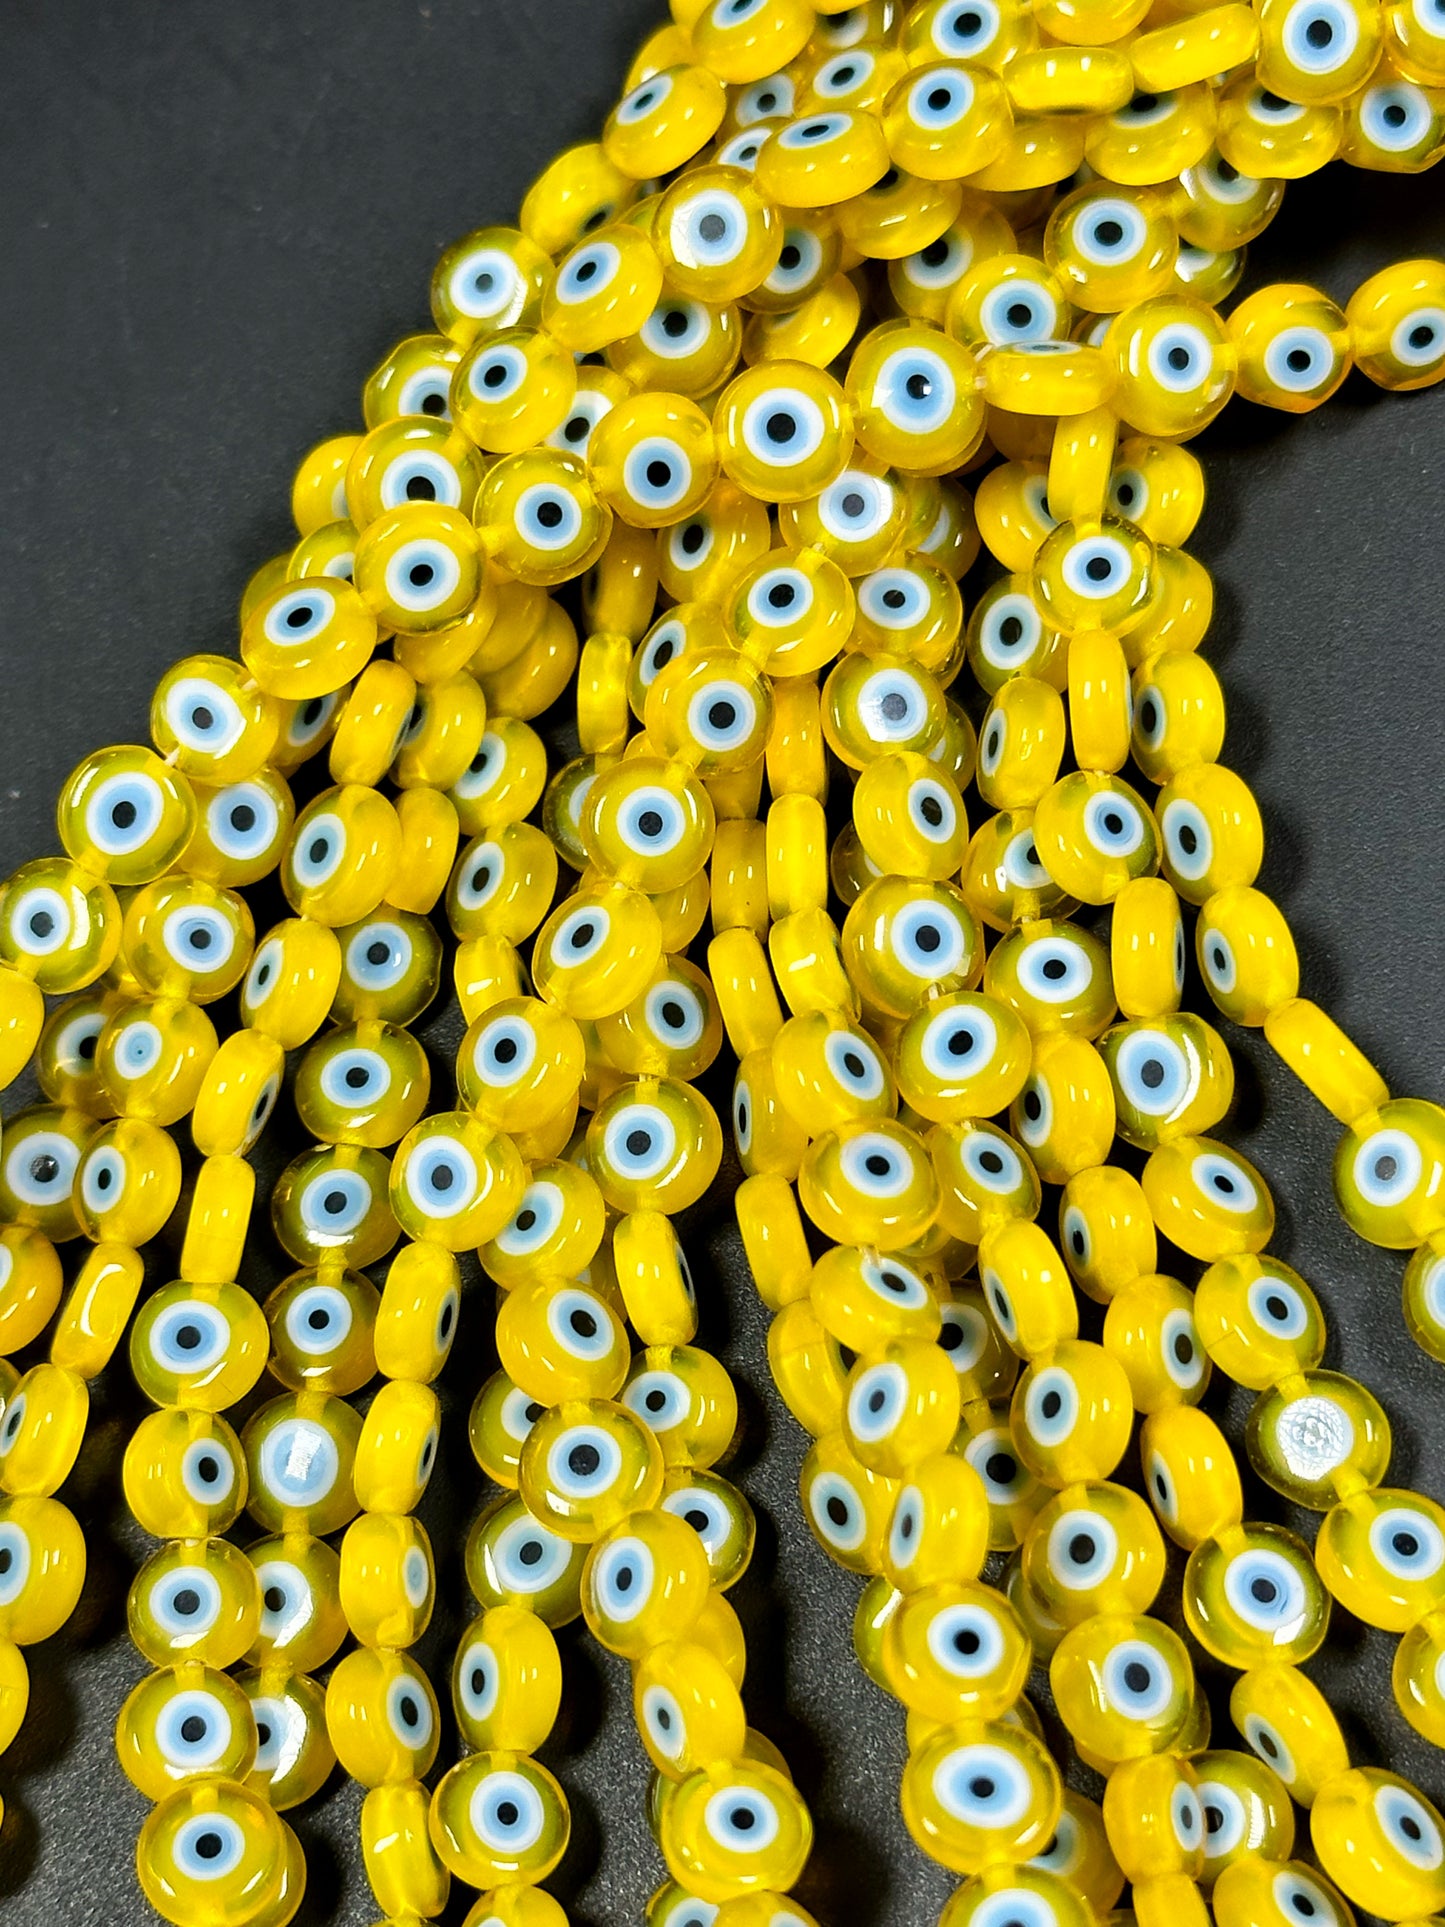 Beautiful Evil Eye Glass Bead 6mm Flat Coin Shape, Beautiful Yellow Color with BLUE Eyes Evil Eye Glass Beads, Religious Amulet Prayer Beads